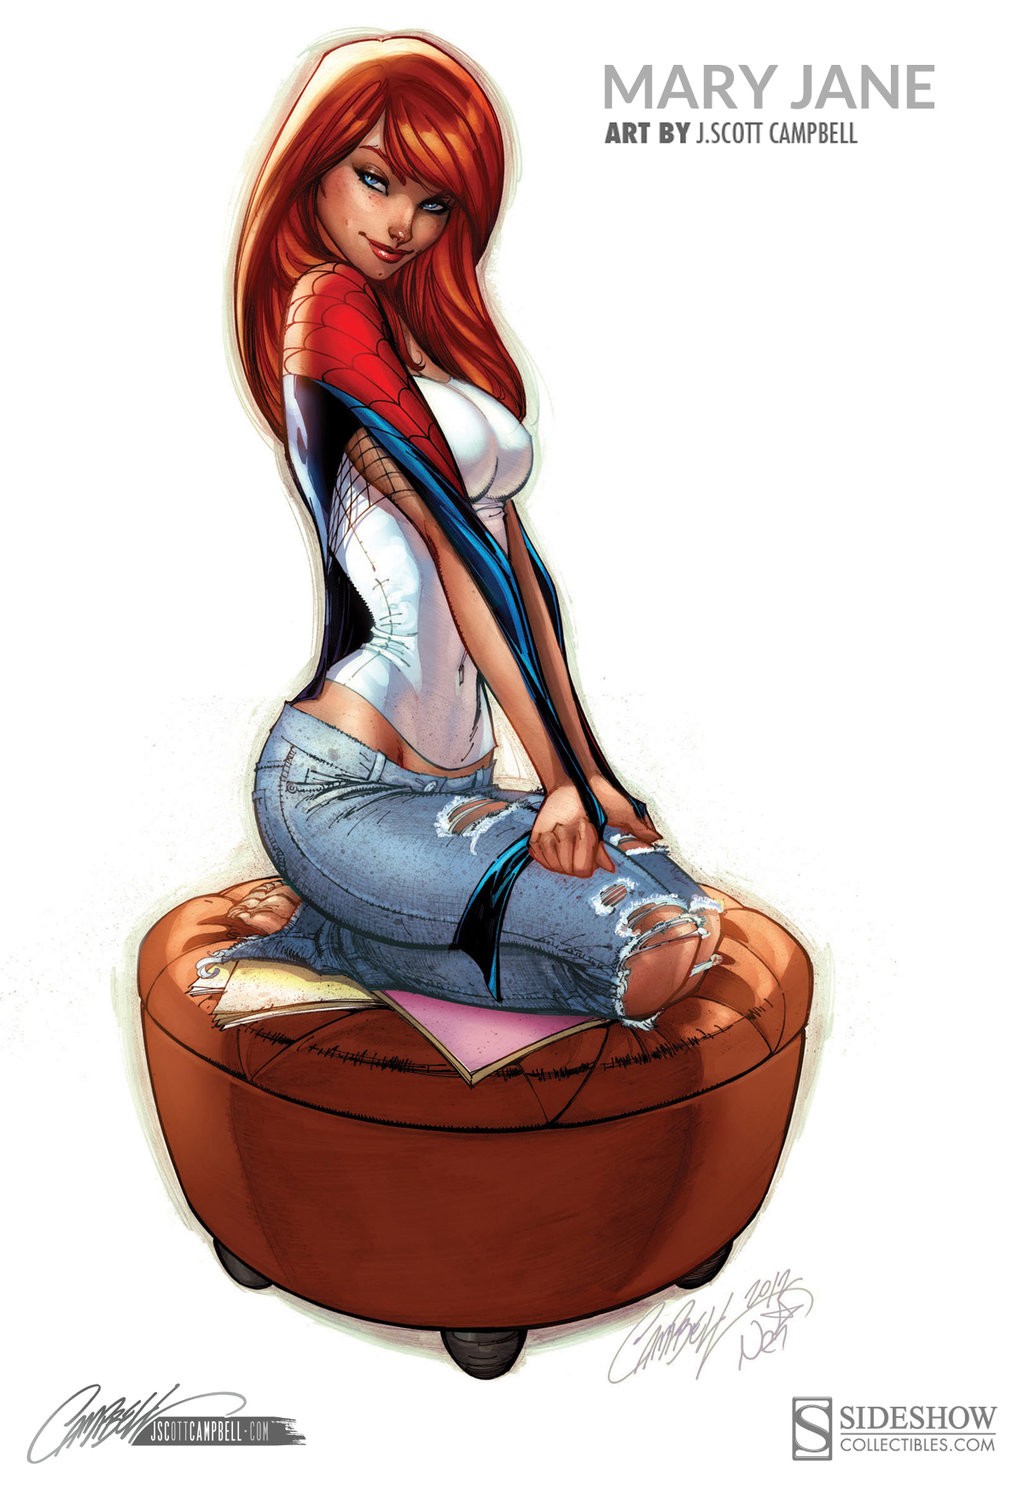 General 1024x1487 fantasy girl boobs redhead kneeling women Mary Jane Watson smiling torn jeans simple background white background artwork red lipstick looking at viewer J. Scott Campbell